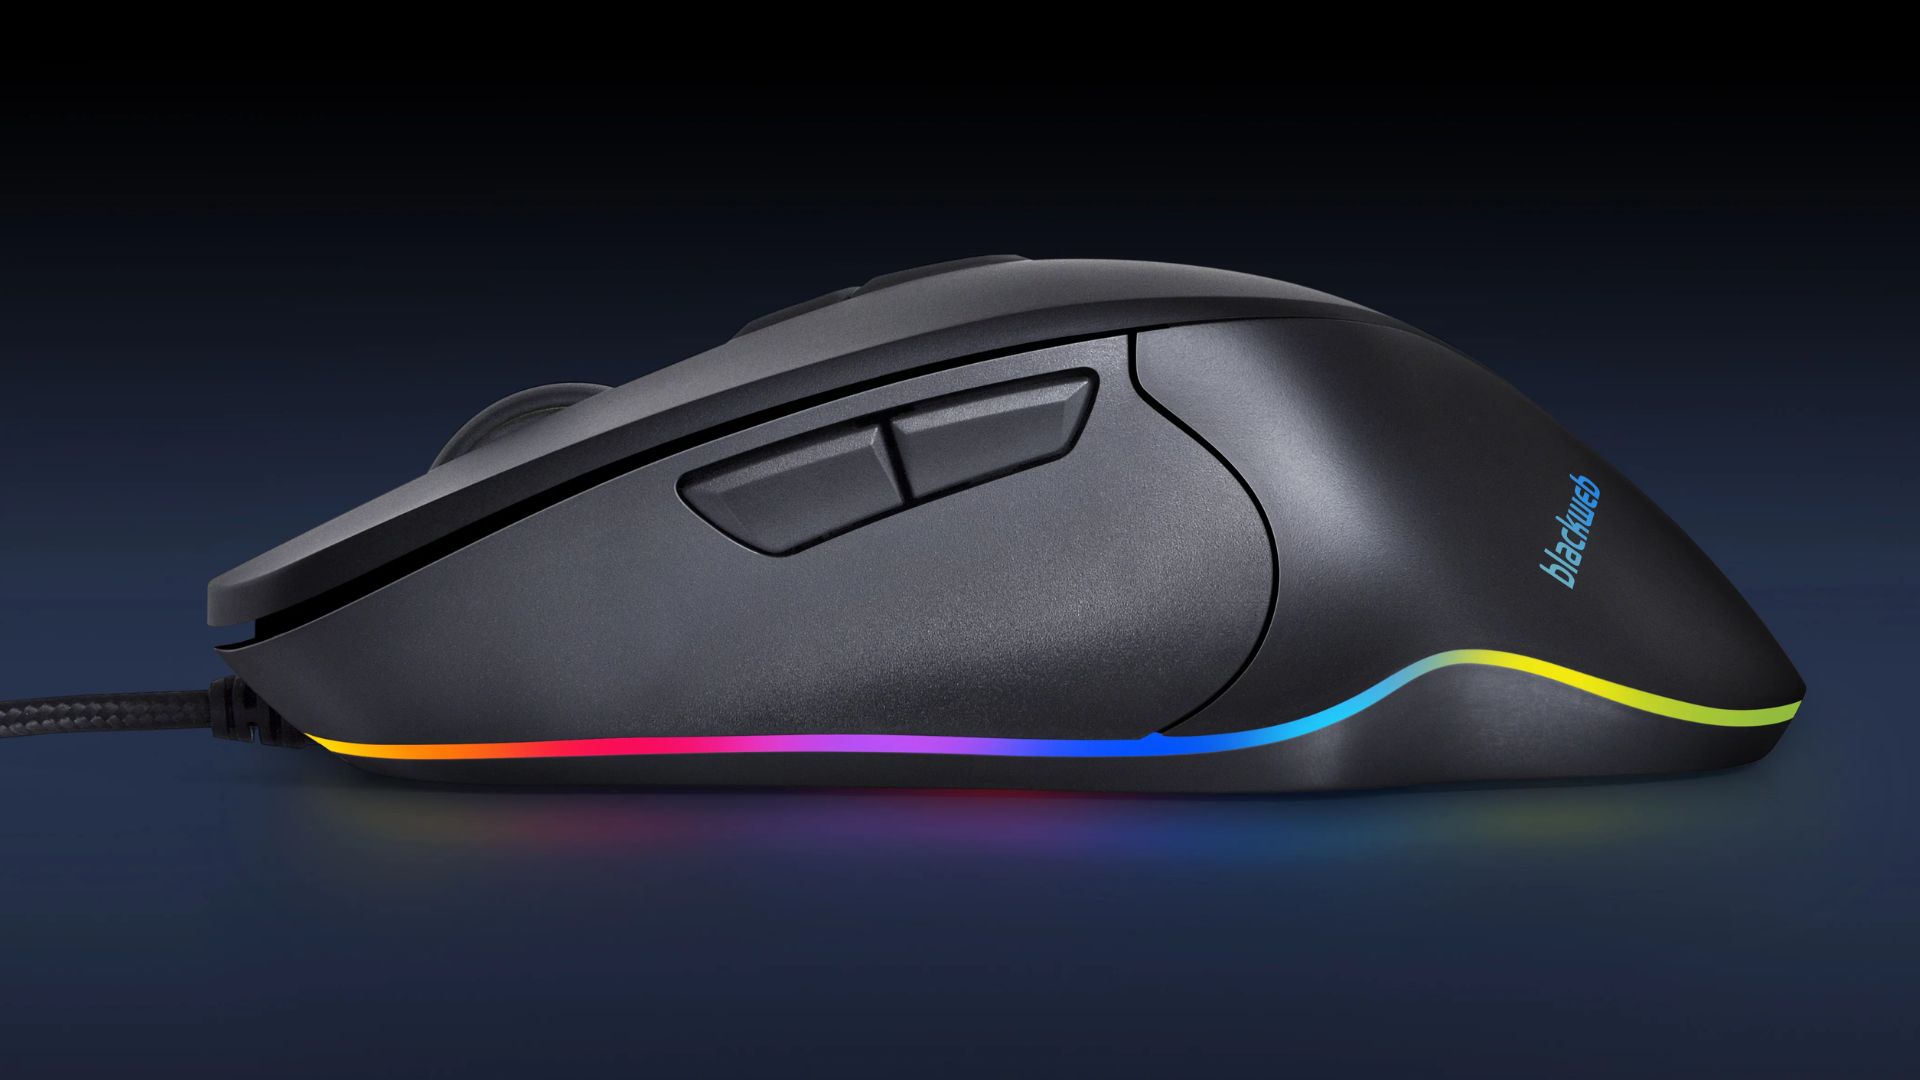 Where Can I Buy A Blackweb Gaming Mouse